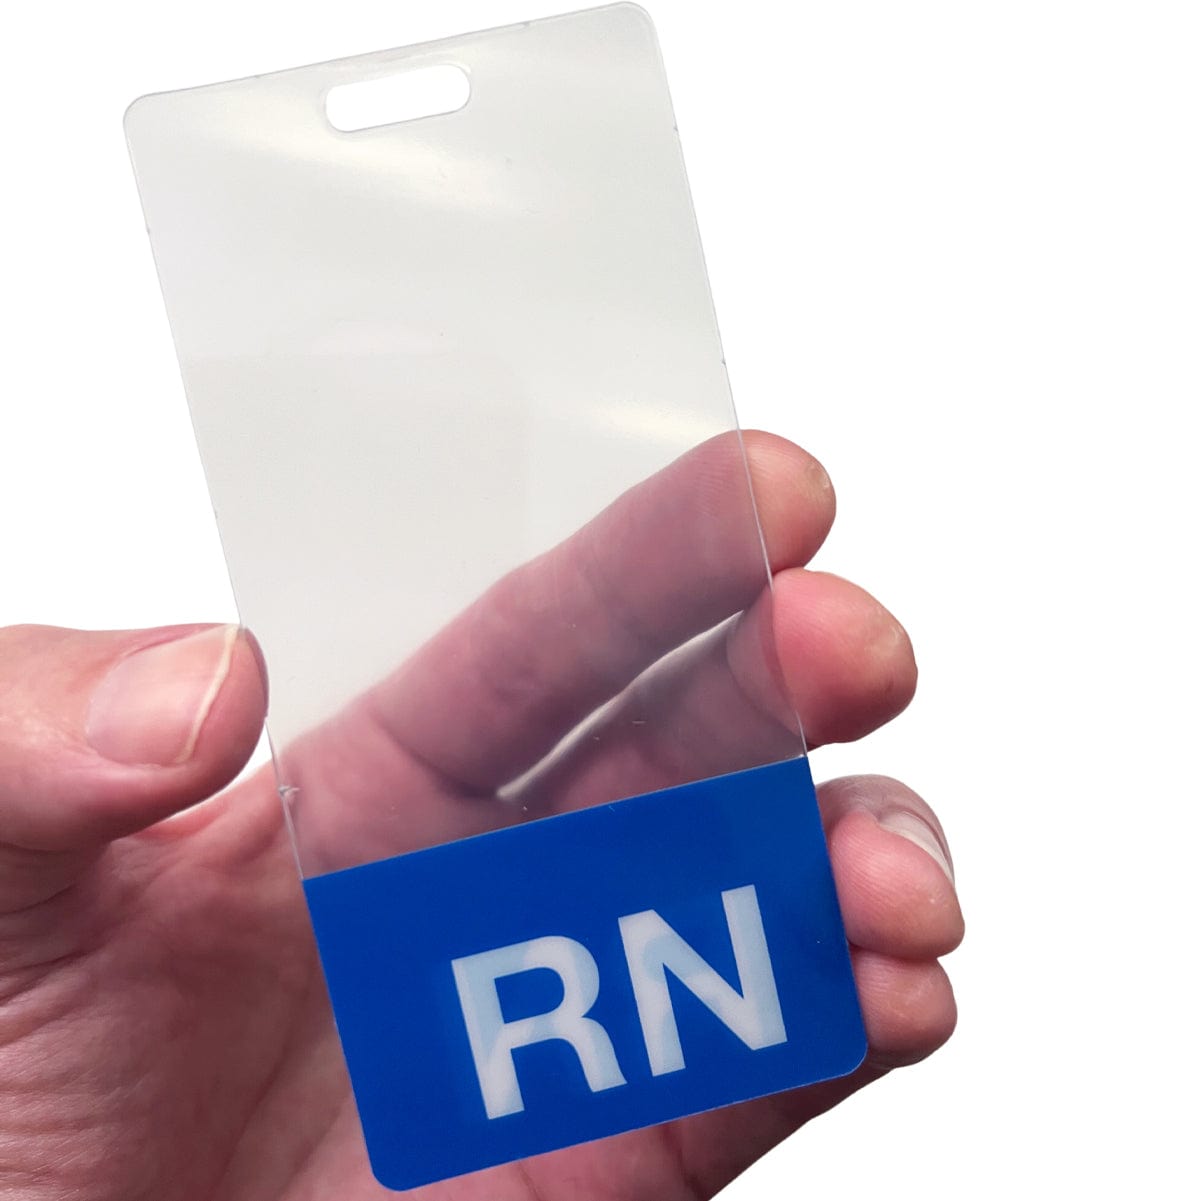 RN Horizontal Badge Buddy with Blue Border by Specialist ID